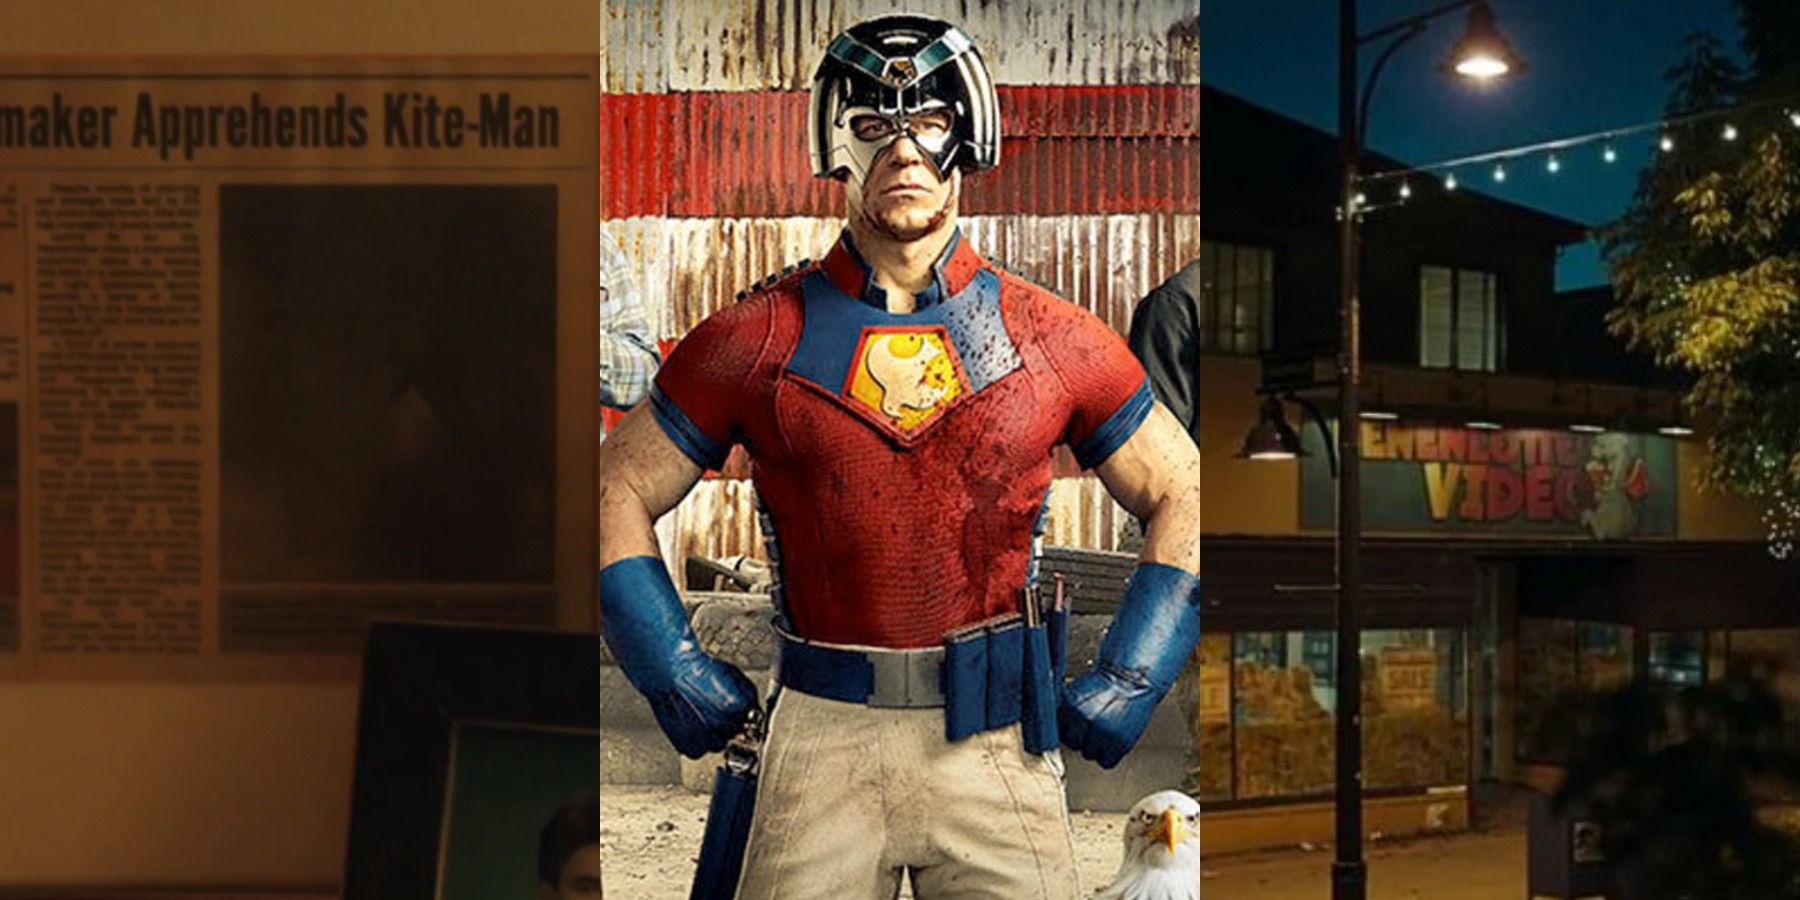 A split image features a Kite-Man Easter egg, James Gunn as Peacemaker, and Henenlotter Video from Peacemaker Episode 5